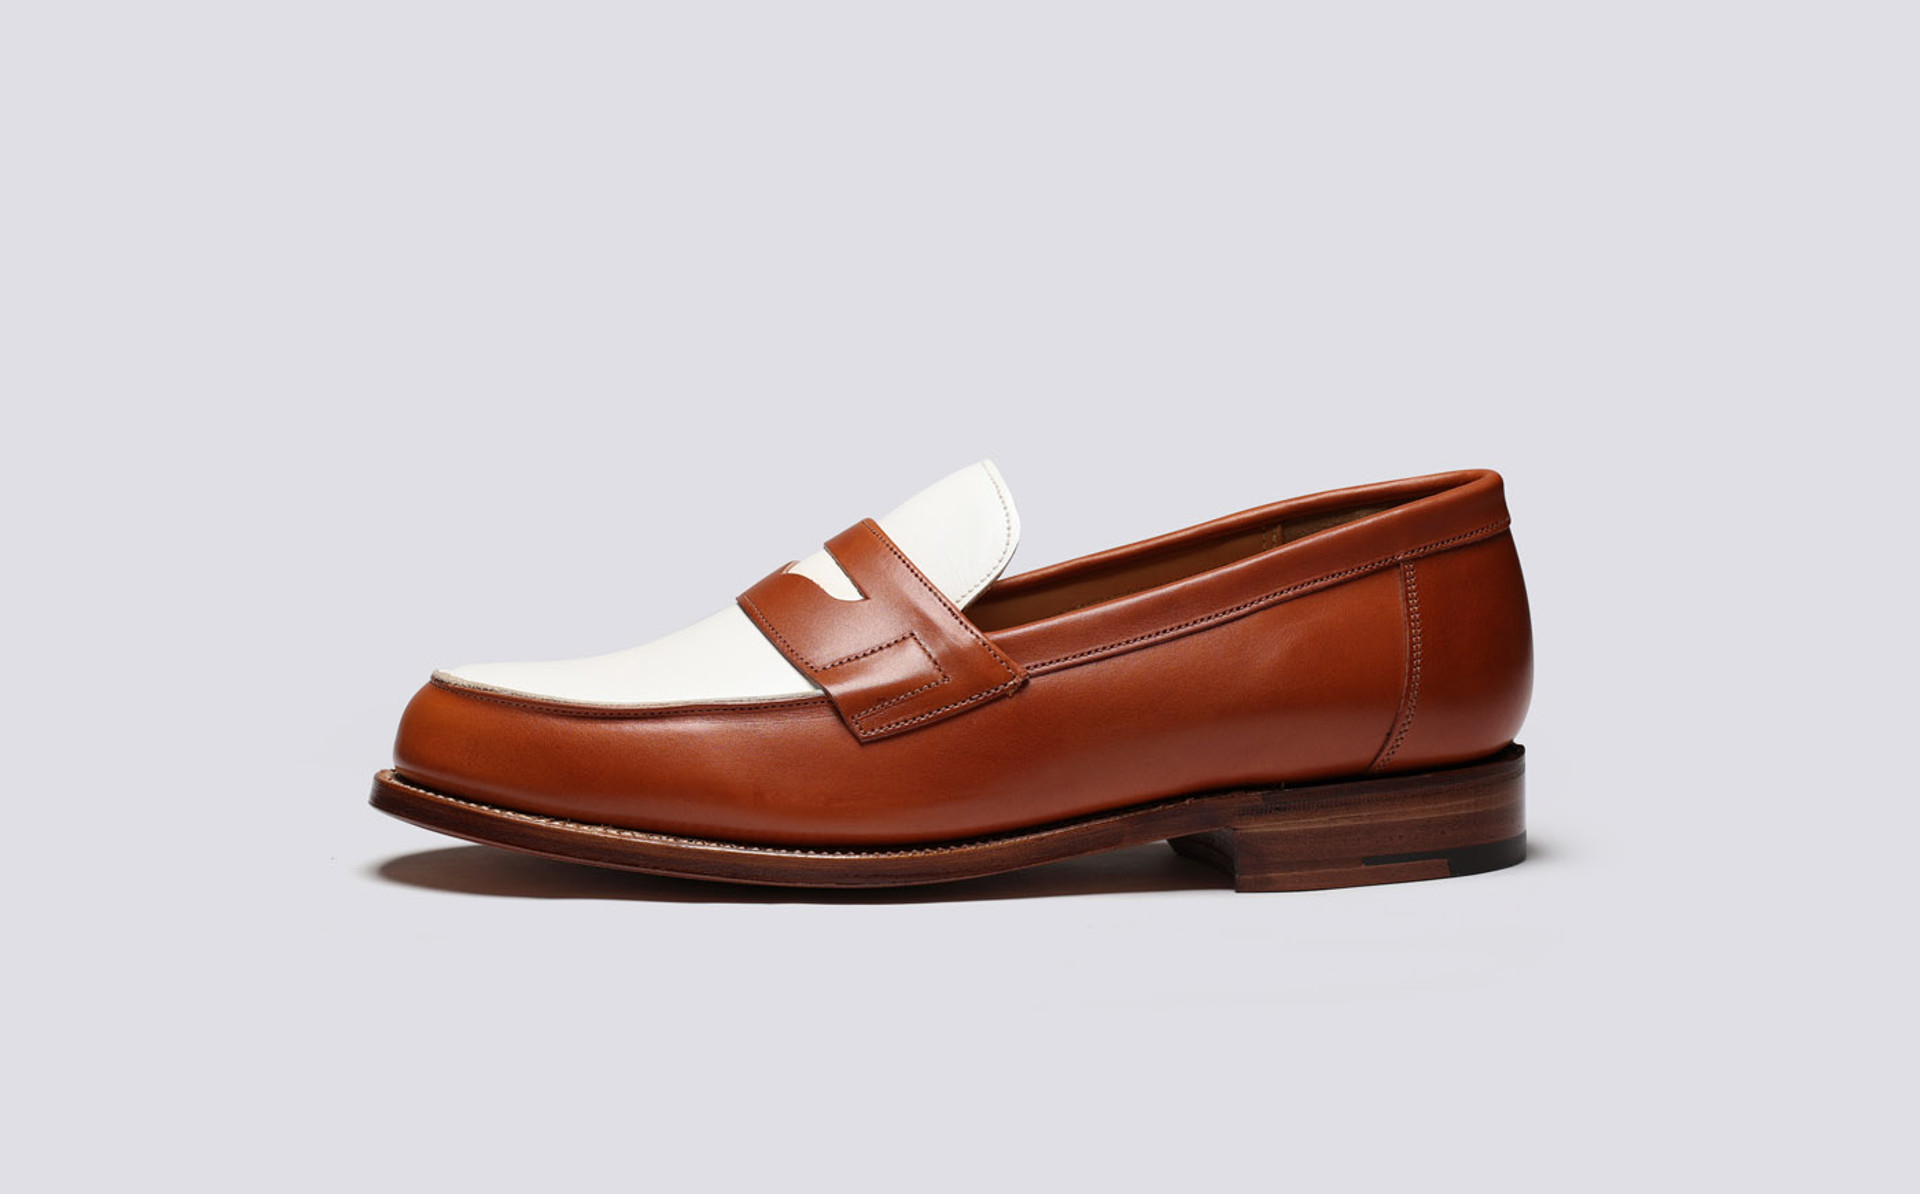 Grenson Epsom - Luxury mens loafers, hand made in England.